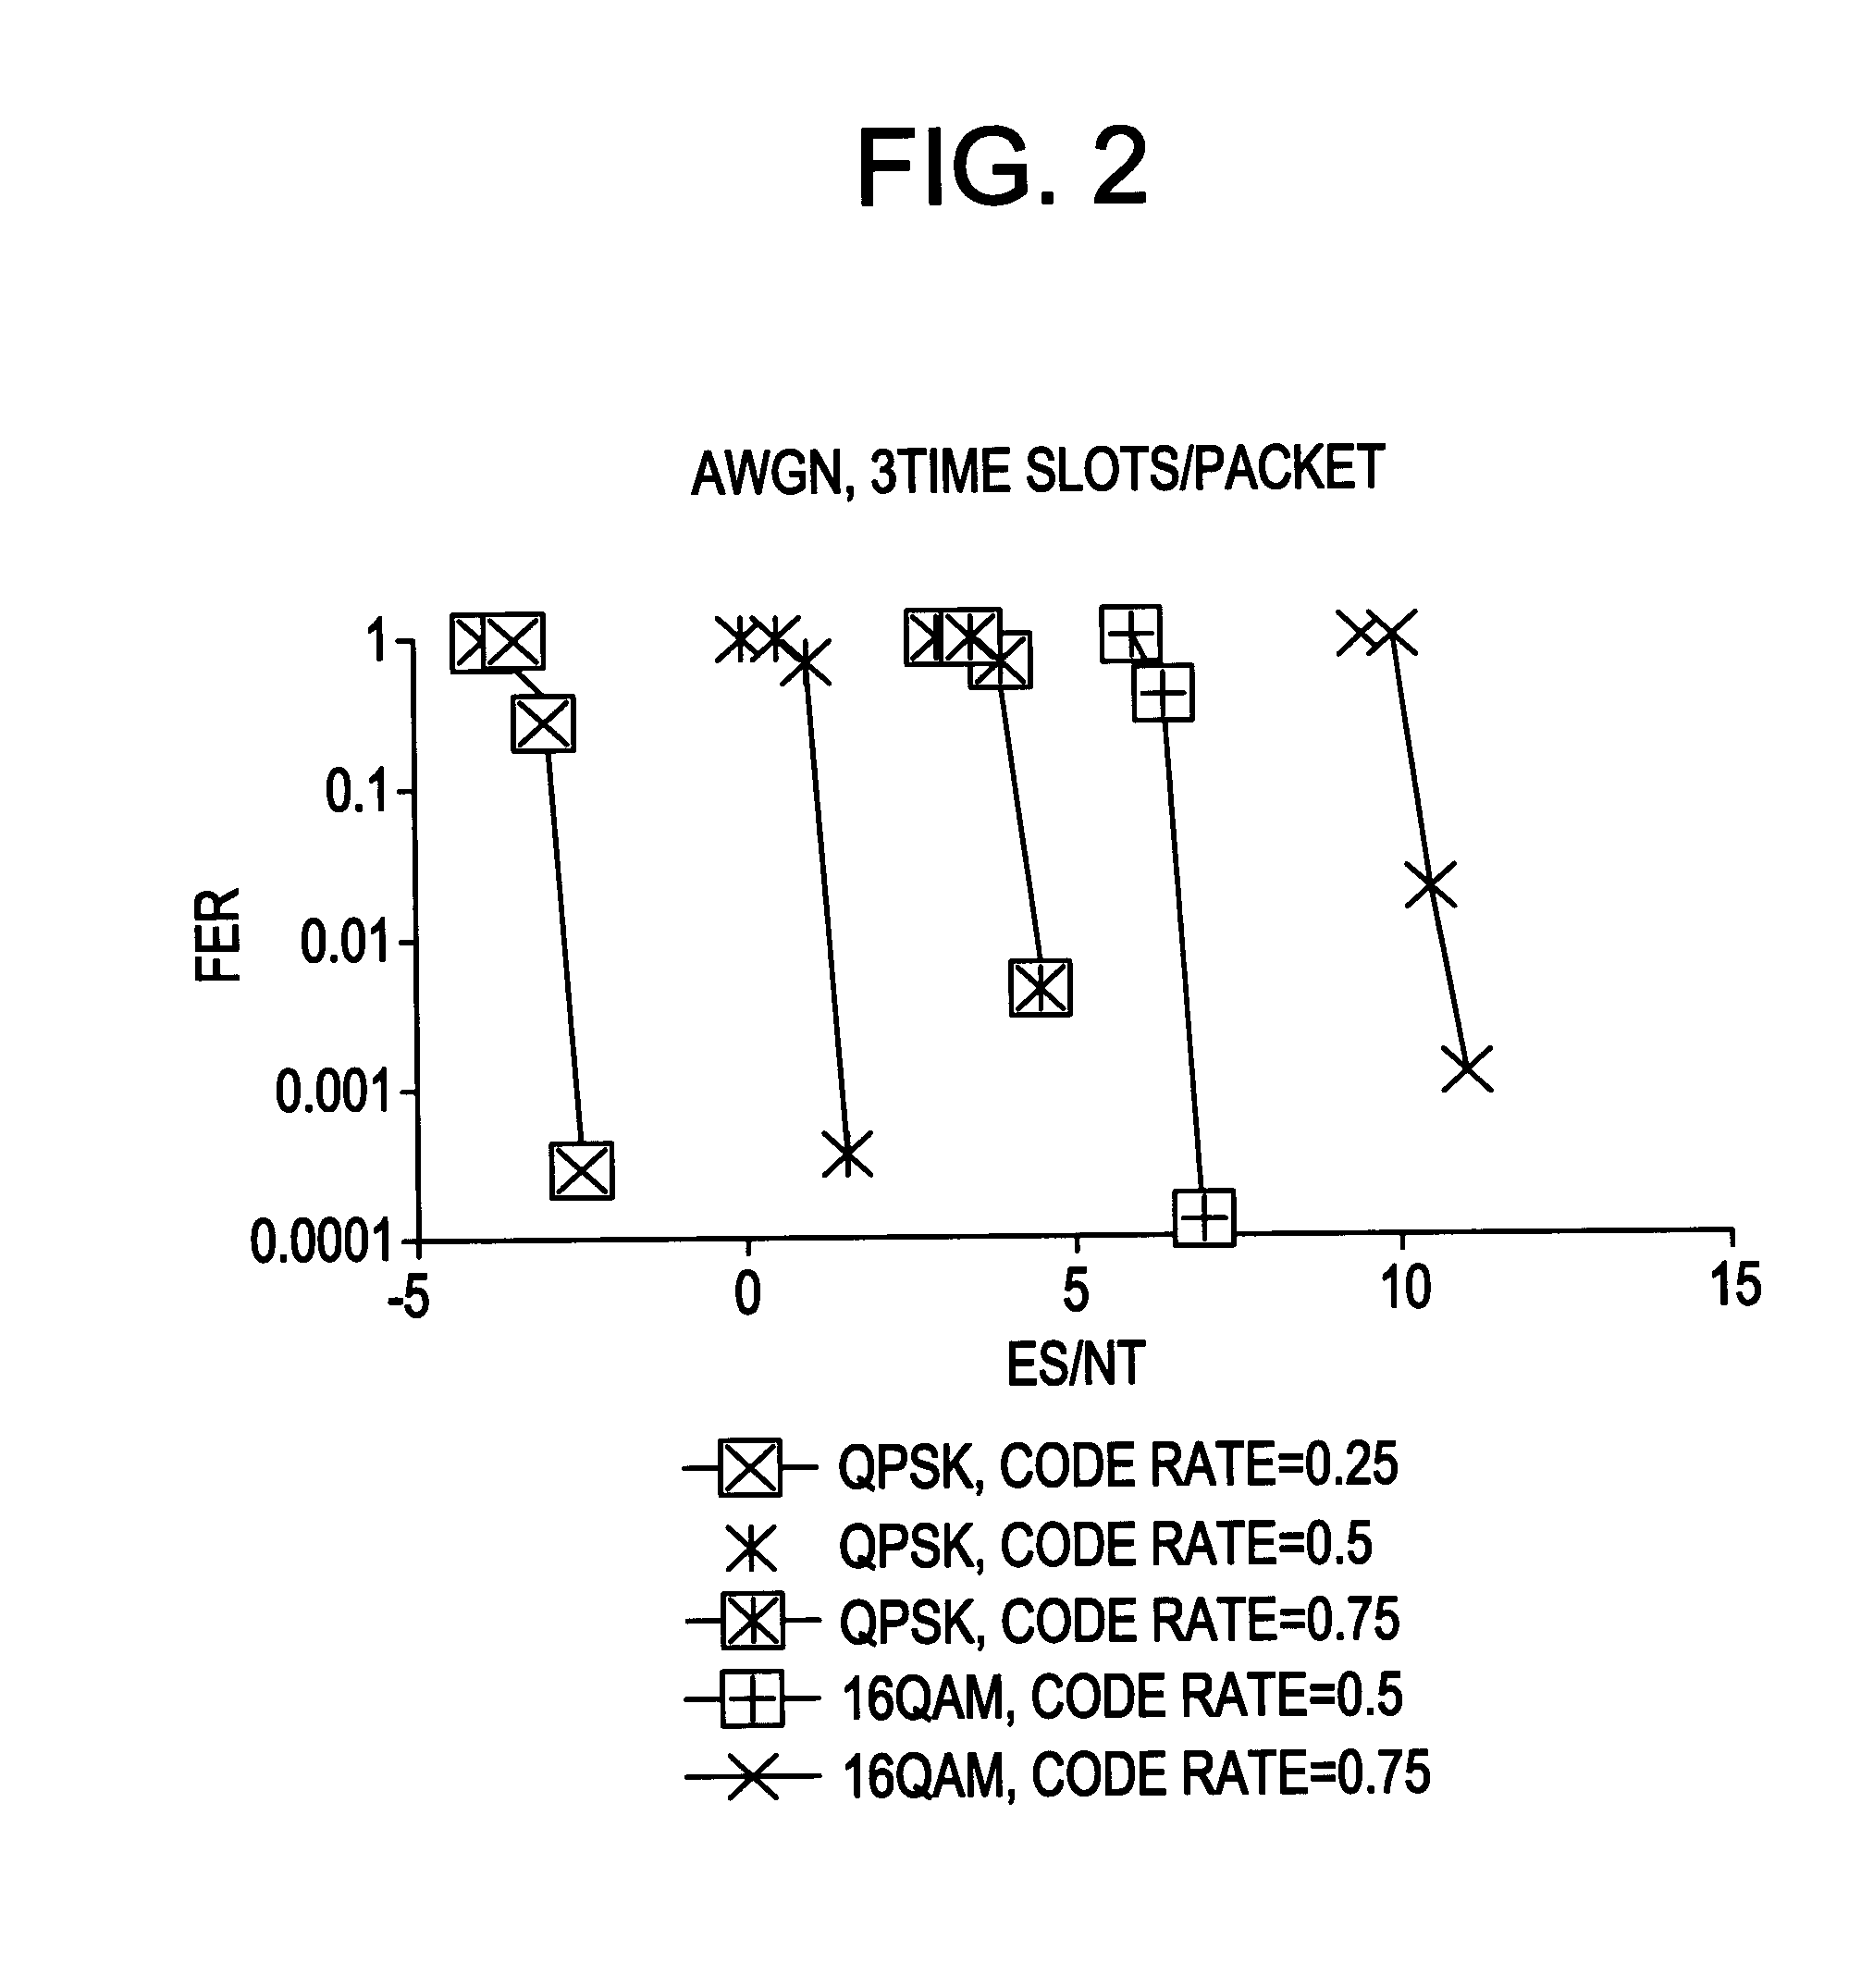 Method of determining transmit power for transmit eigenbeams in a multiple-input multiple-output communications system